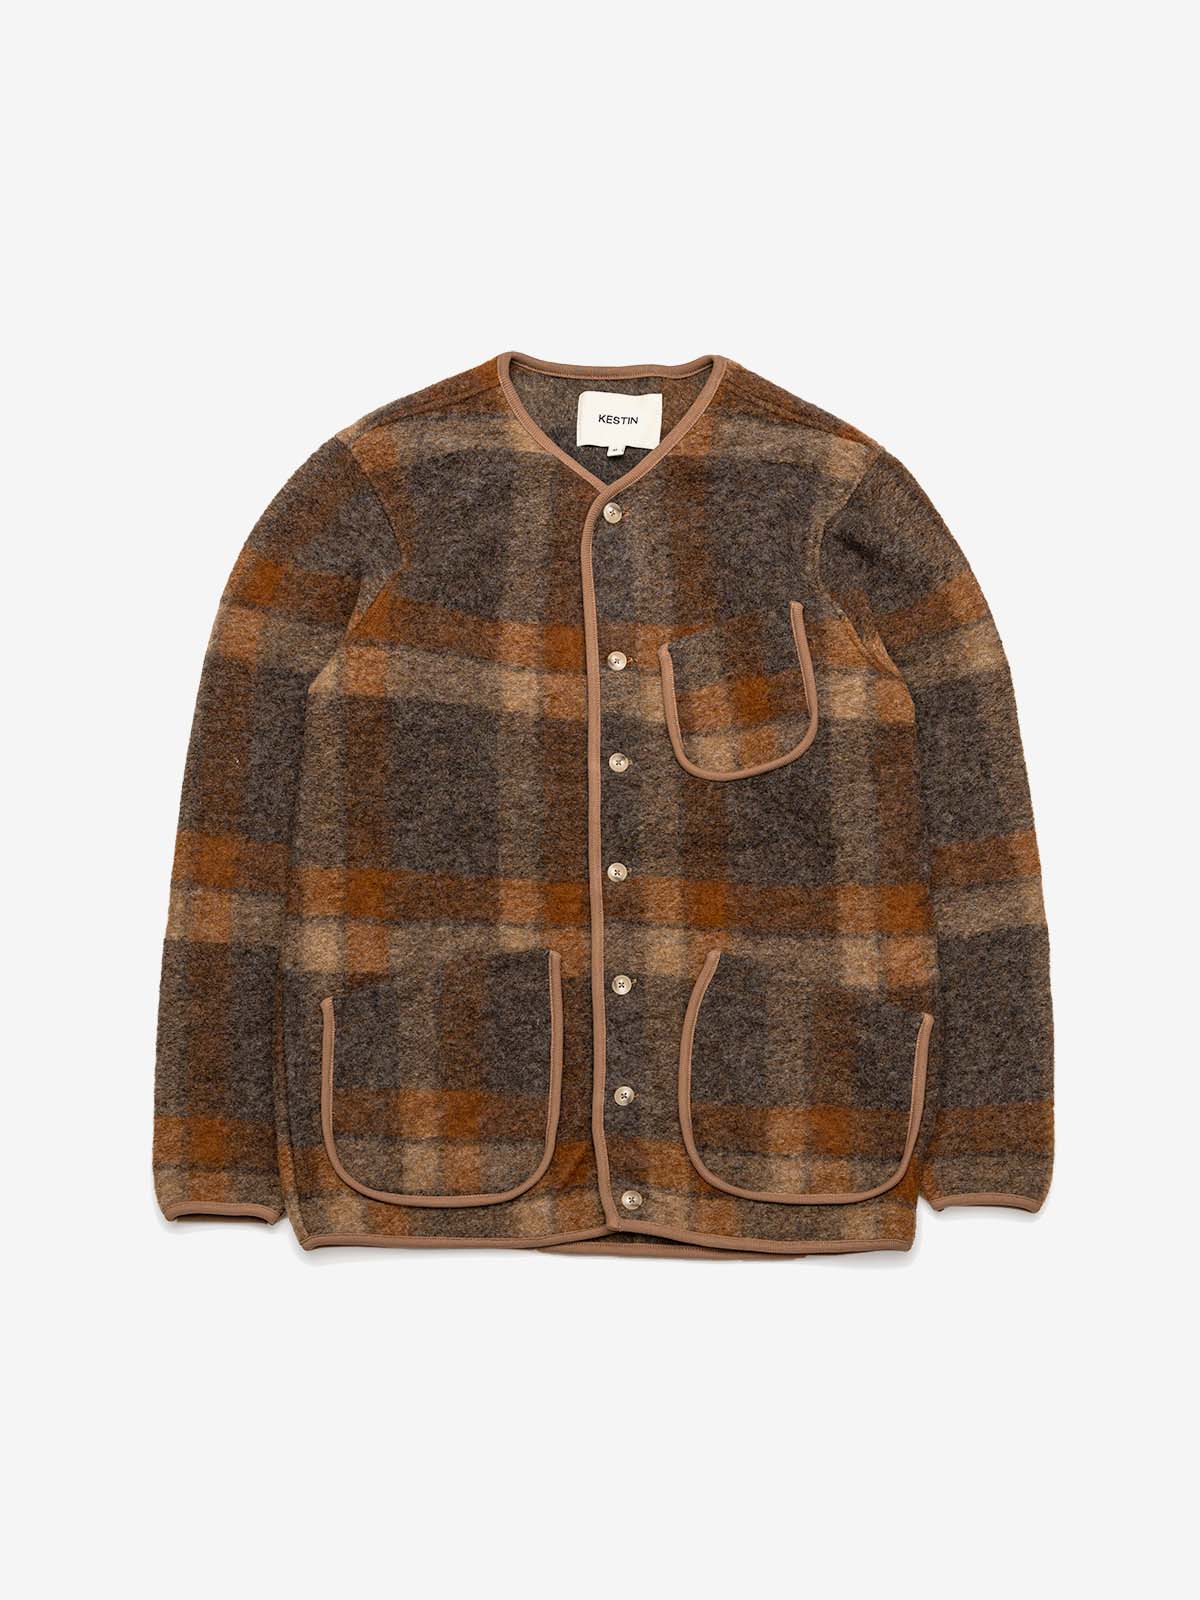 soldes hiver 2022 kestin neist cardigan wool rust check fw22 tempest works